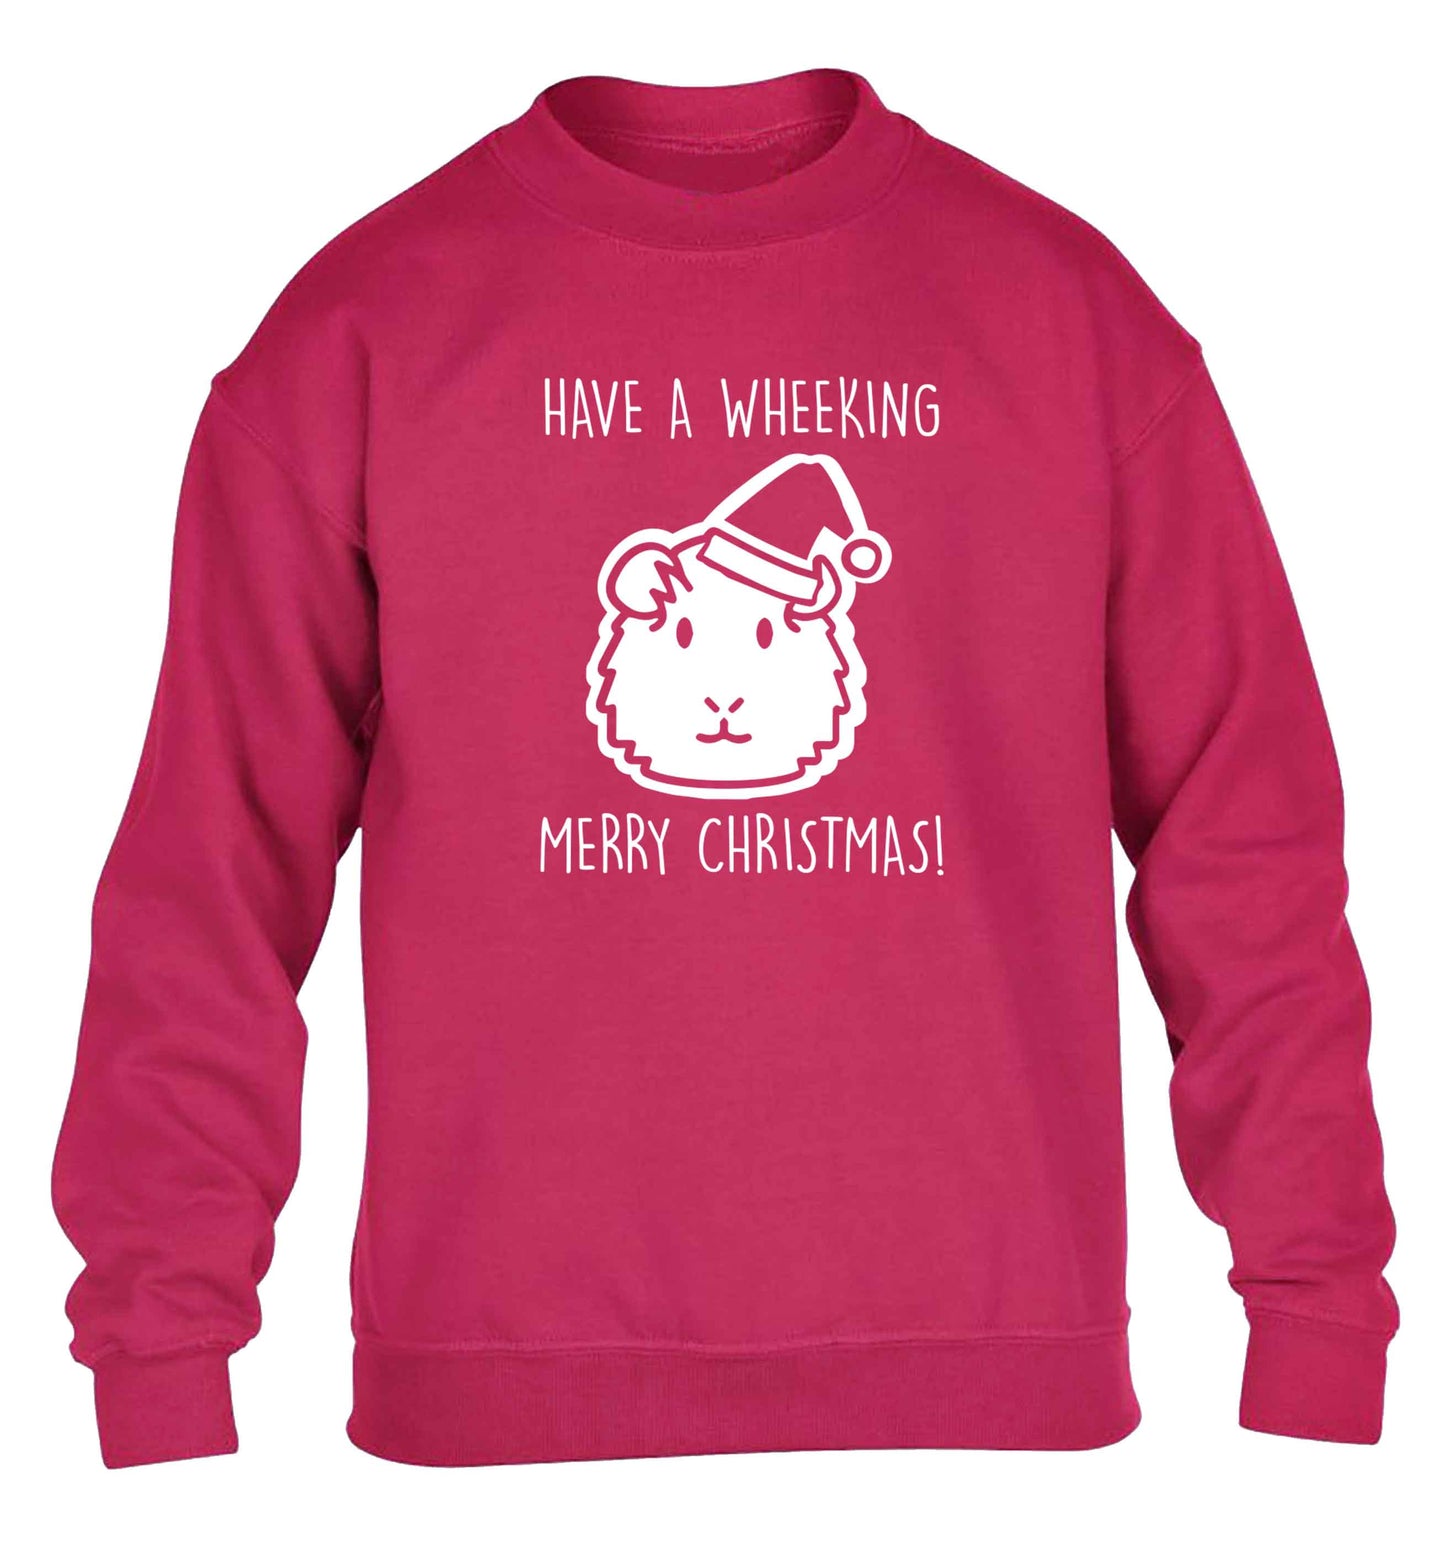 Have a wheeking merry Christmas children's pink sweater 12-13 Years